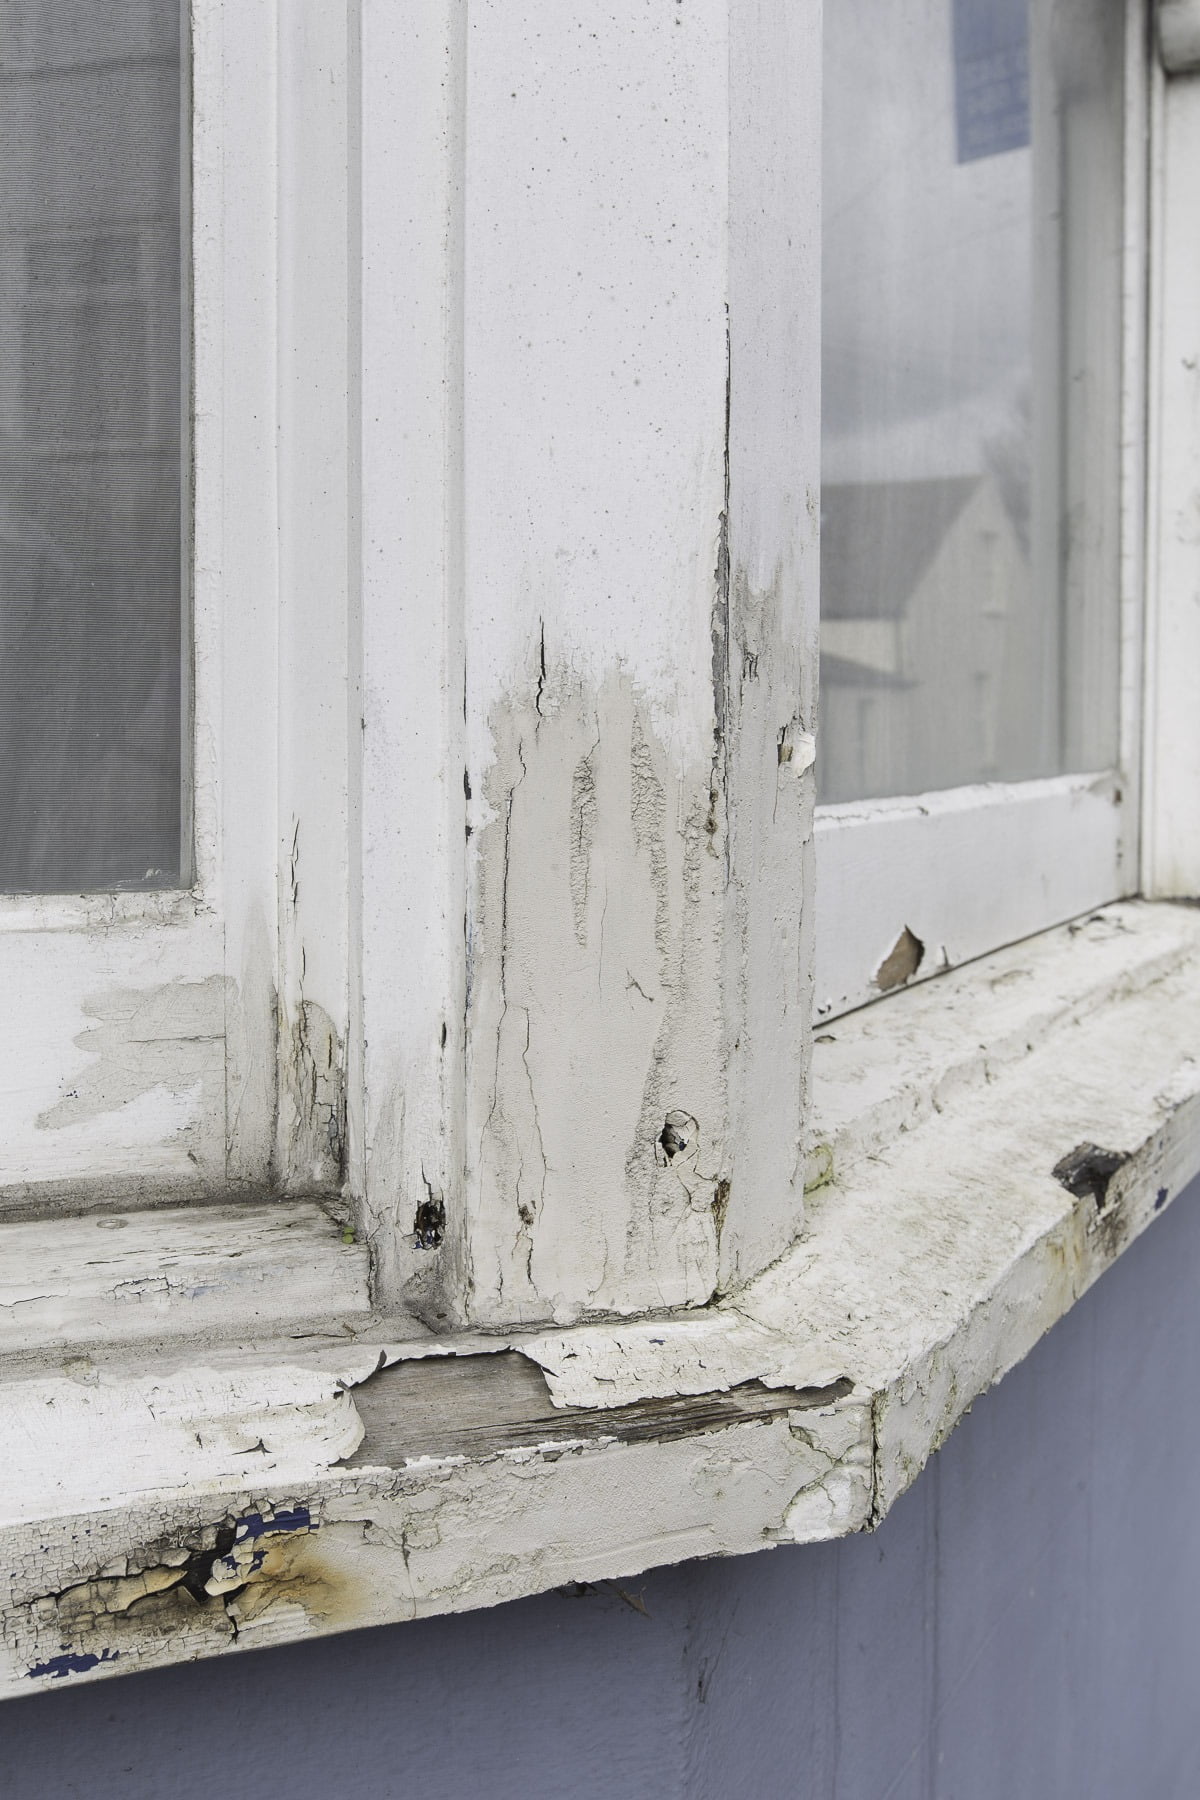 Save your sash windows with this how to guide by blogger Maxine Brady